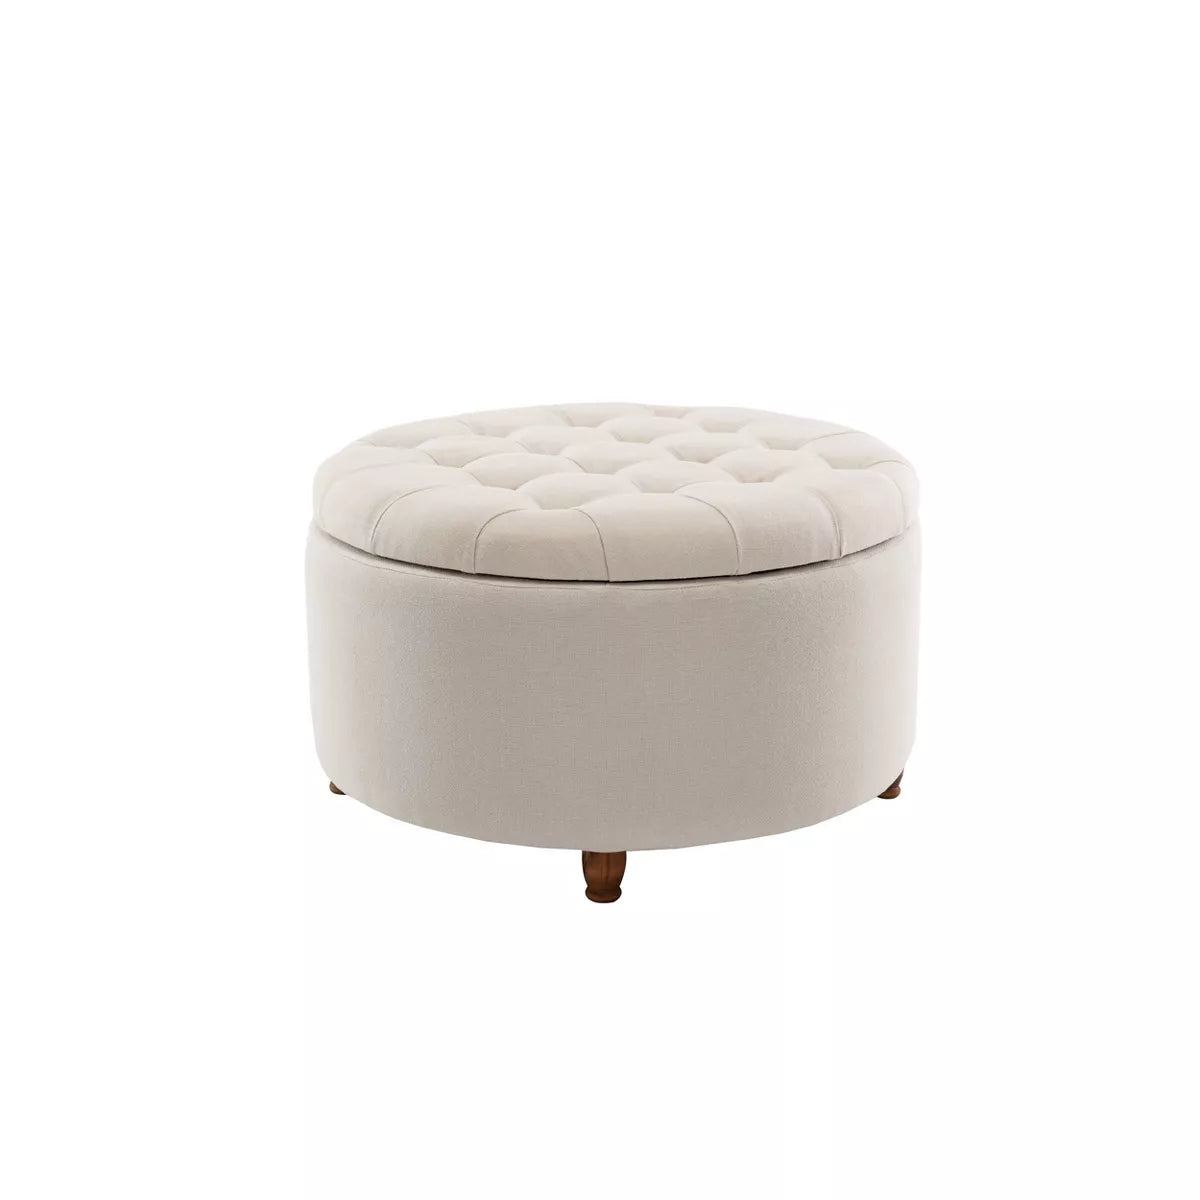 Large Round Tufted Storage Ottoman with Lift Off Lid - WOVENBYRD